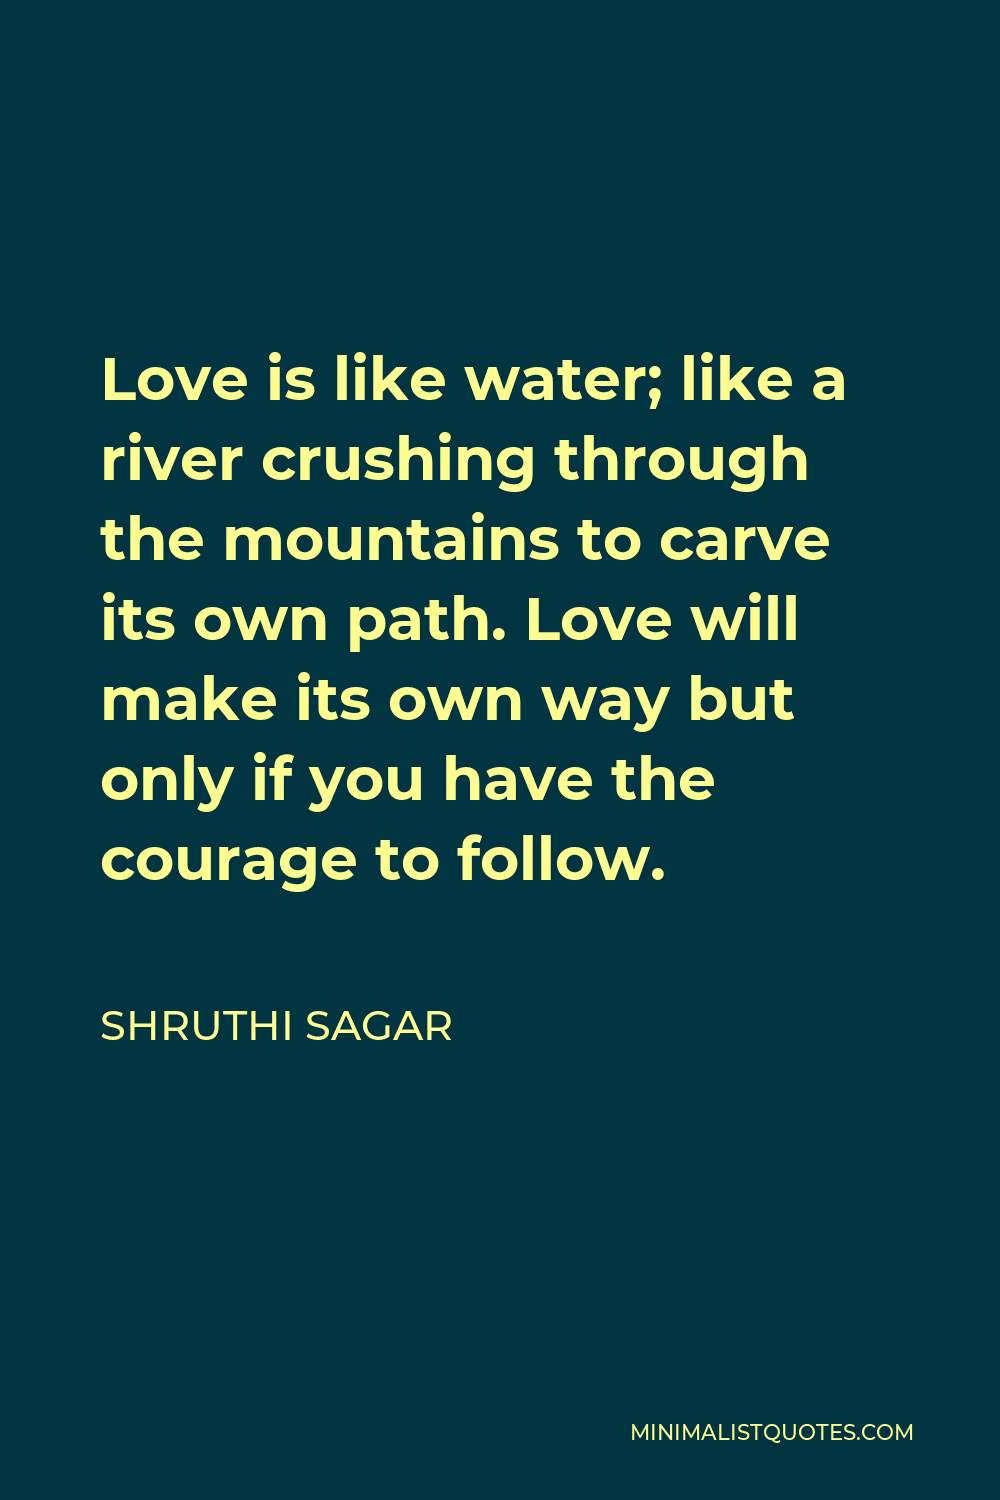 Shruthi Sagar Quote - Love is like water; like a river crushing through the mountains to carve its own path. Love will make its own way but only if you have the courage to follow.